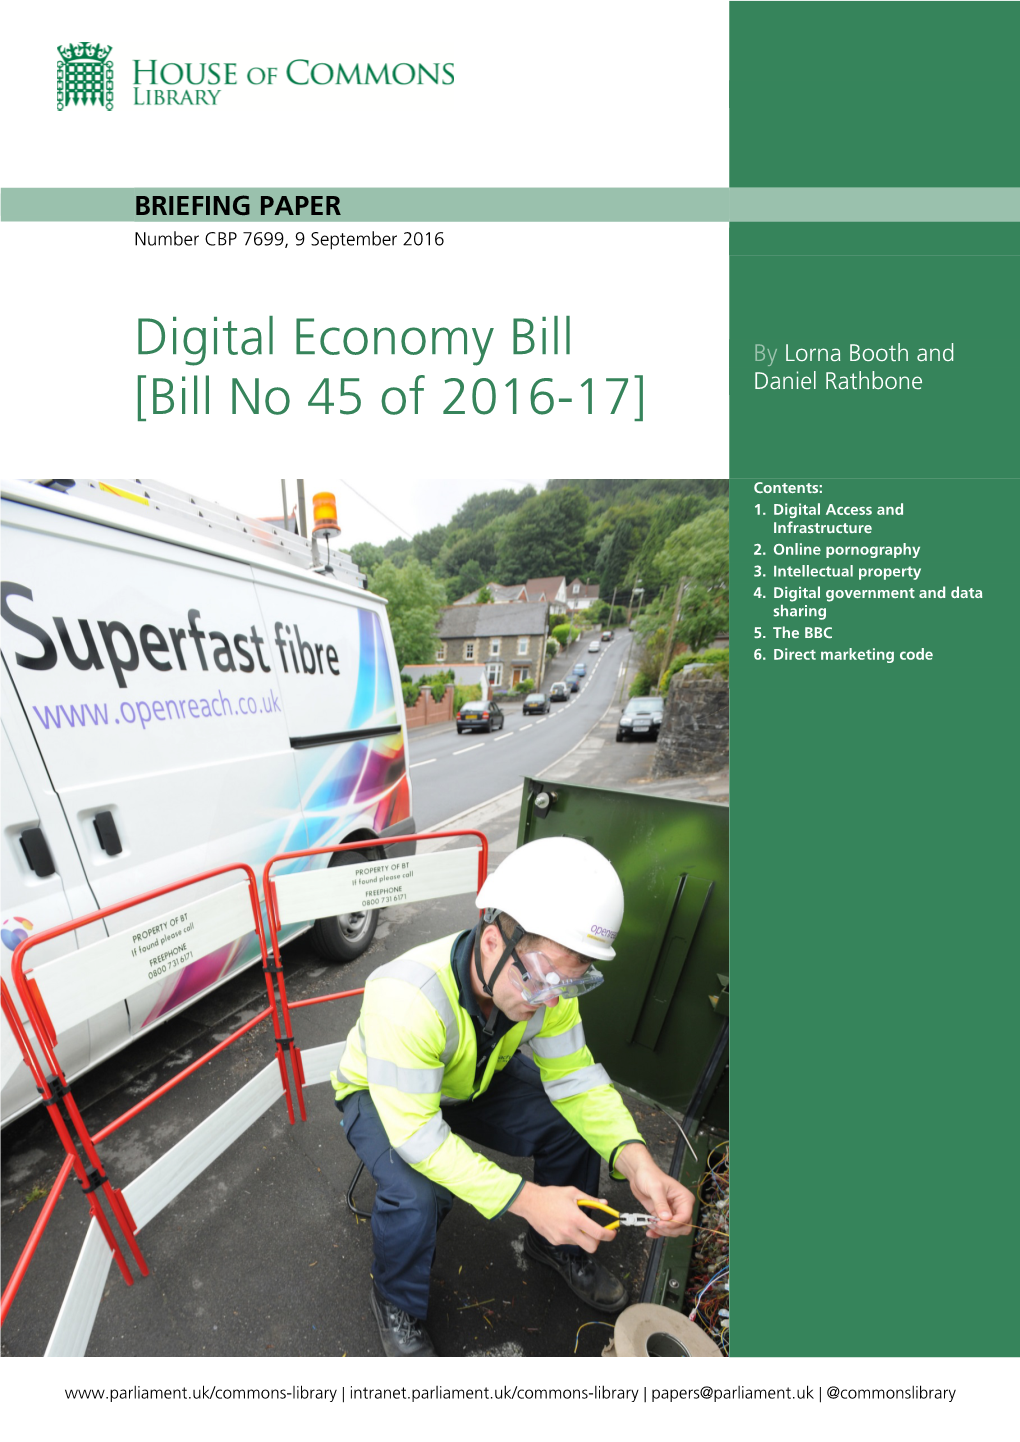 Digital Economy Bill by Lorna Booth And